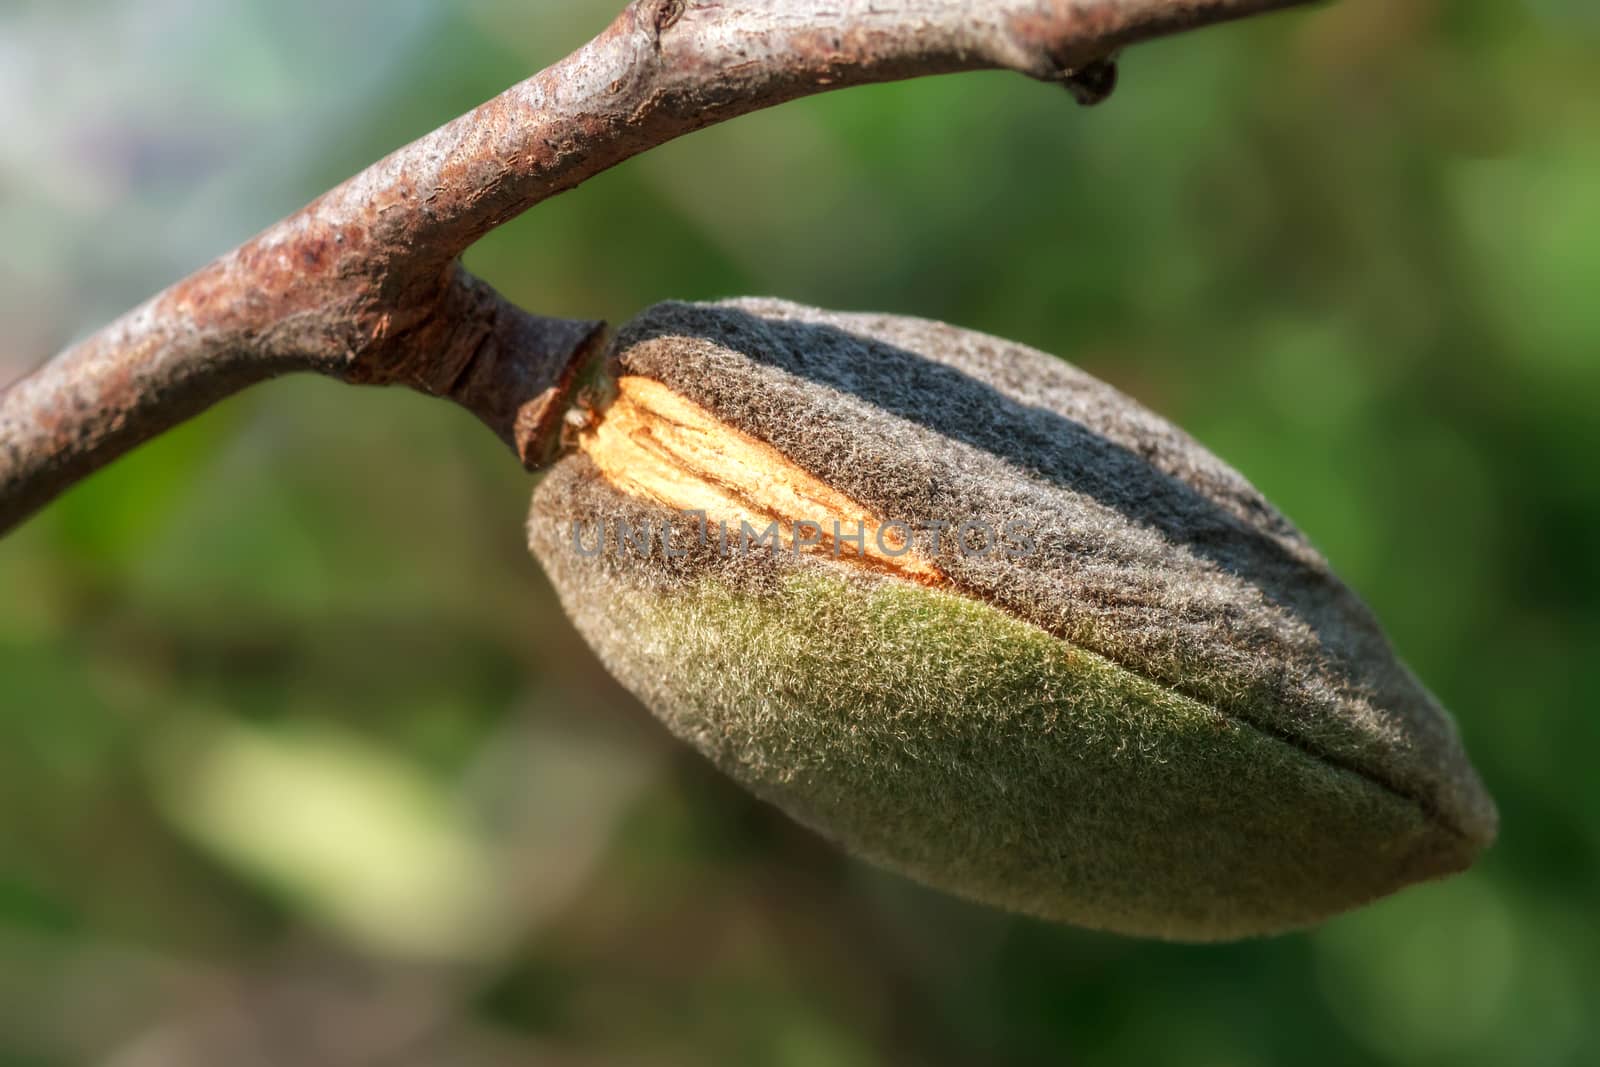 Ripe almonds walnut hanging on a branch. Close-up, focus on the nut